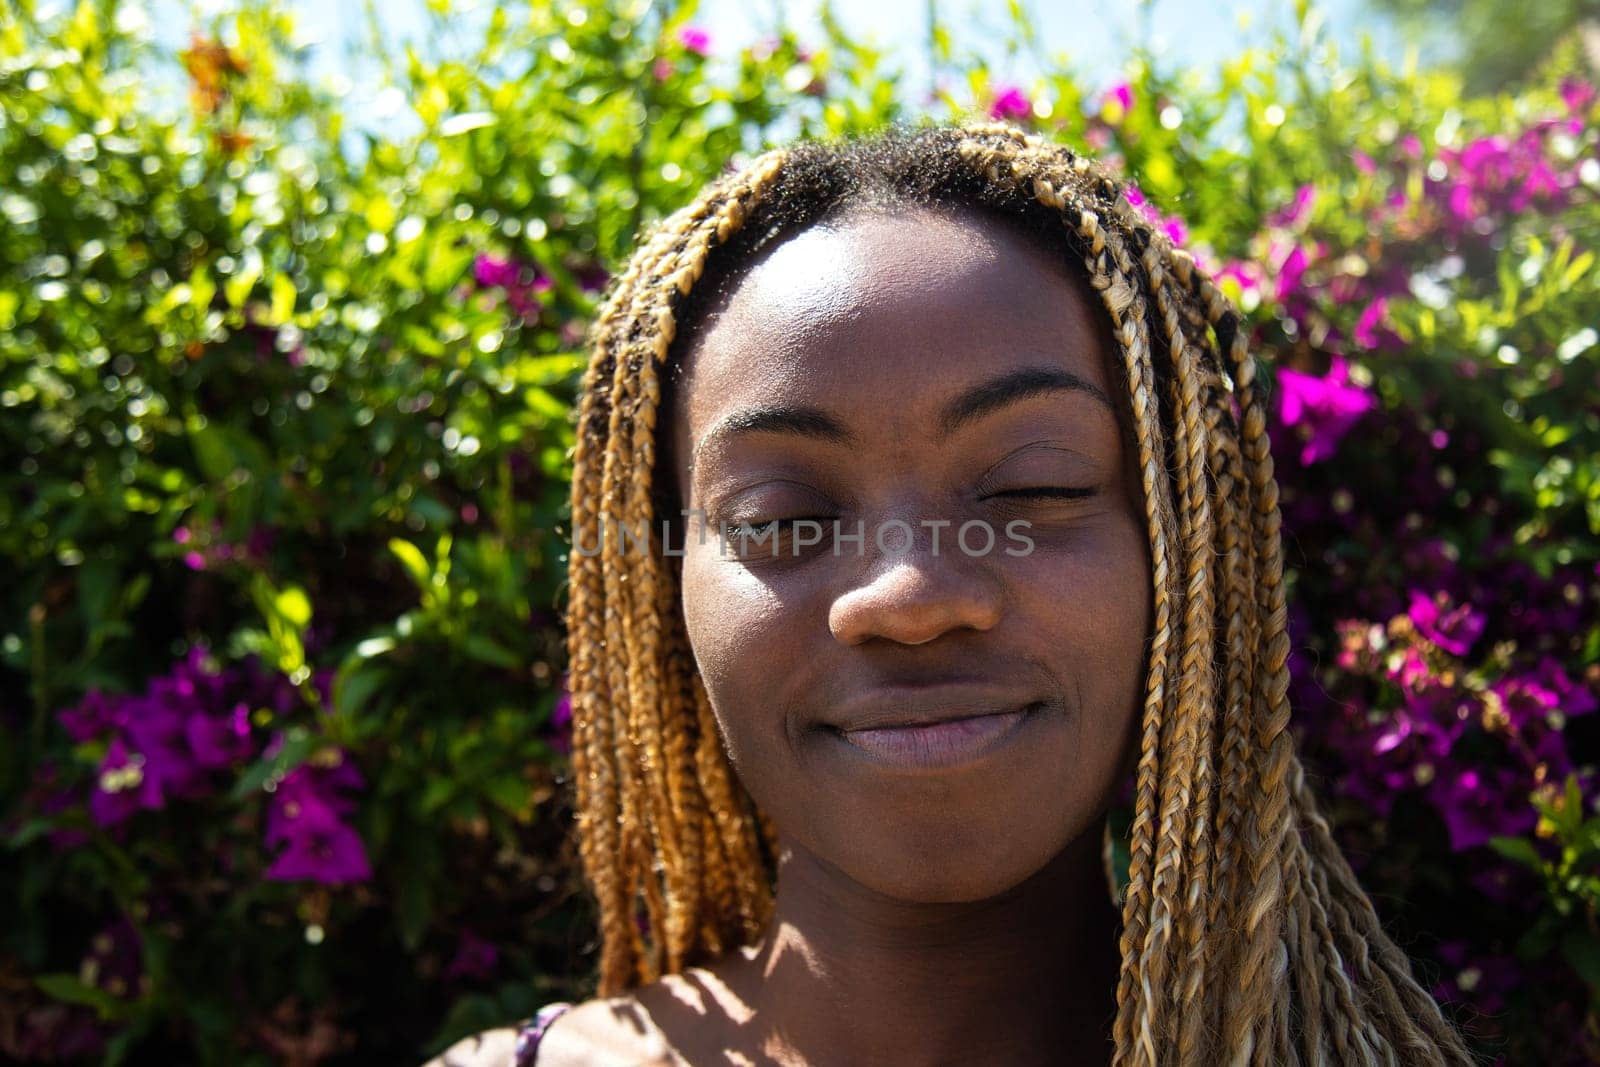 Headshot of african american young woman with eyes closed surrounded by greenery and flowers. Nature.